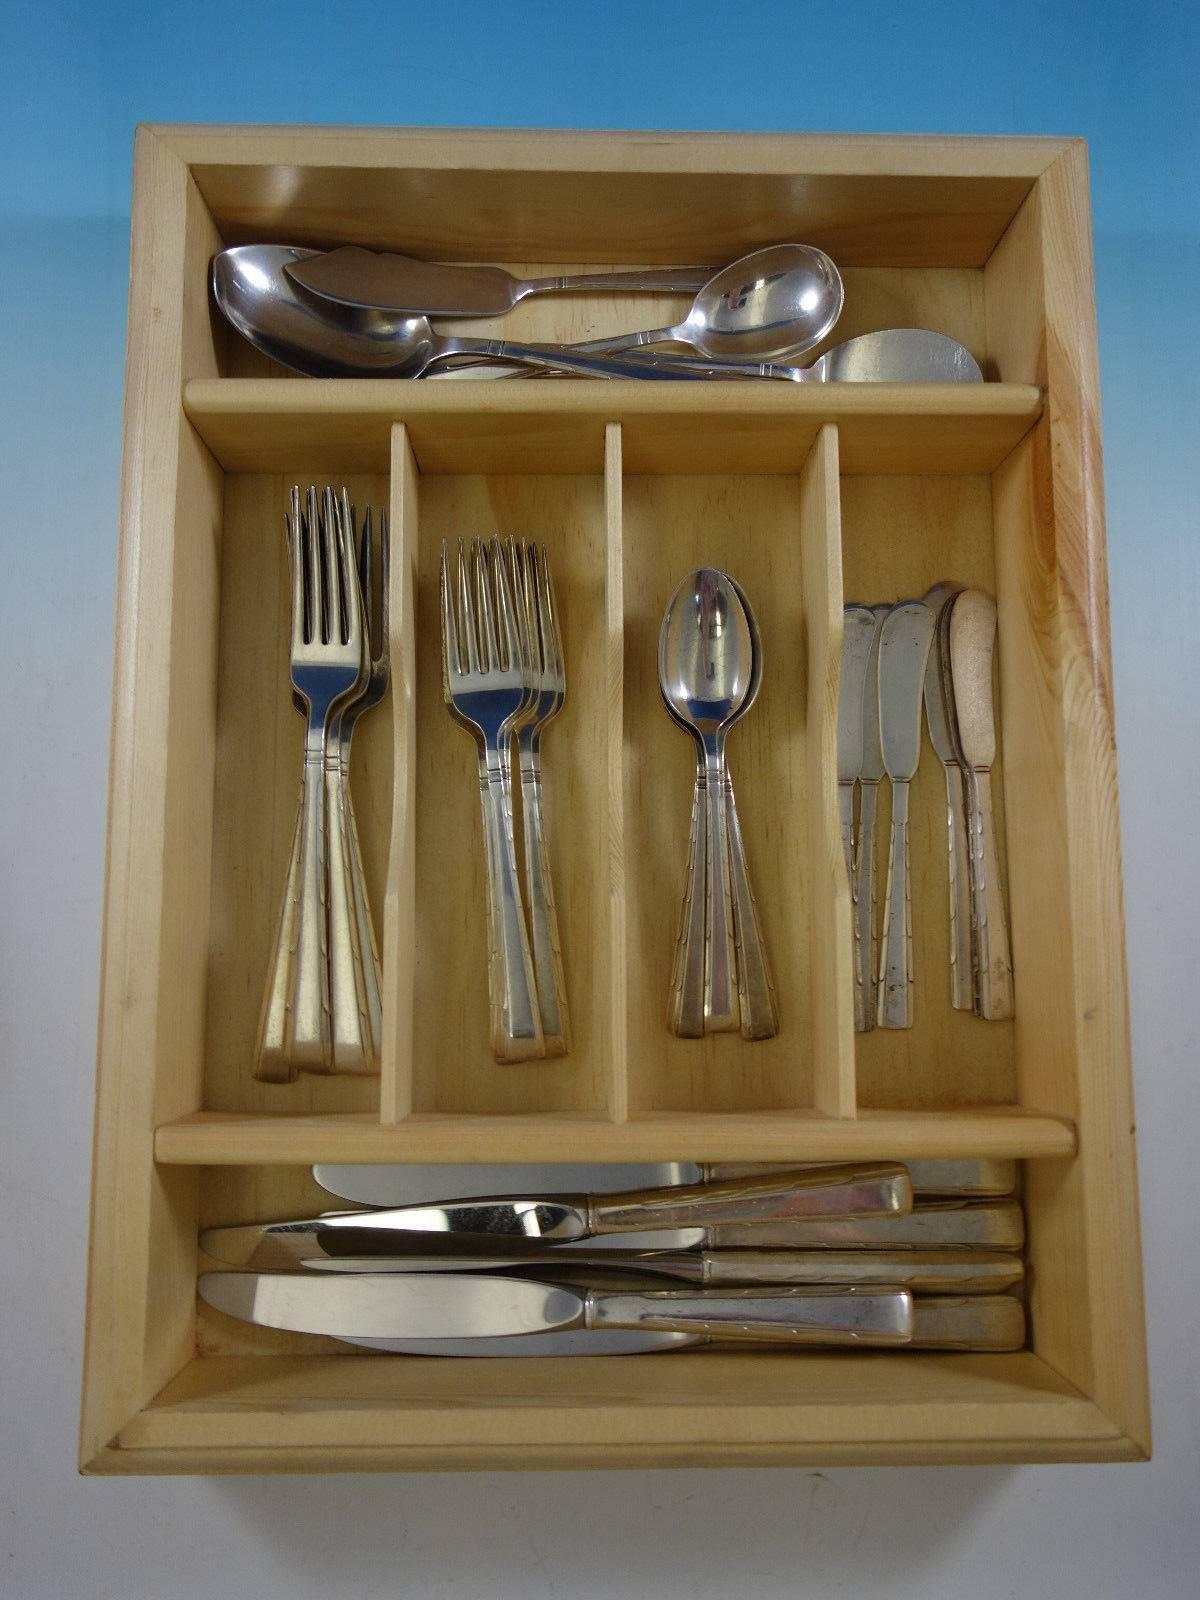 Horizon by Easterling sterling silver flatware set, 34 pieces. Great starter set! This set includes: 

Six knives, 8 5/8